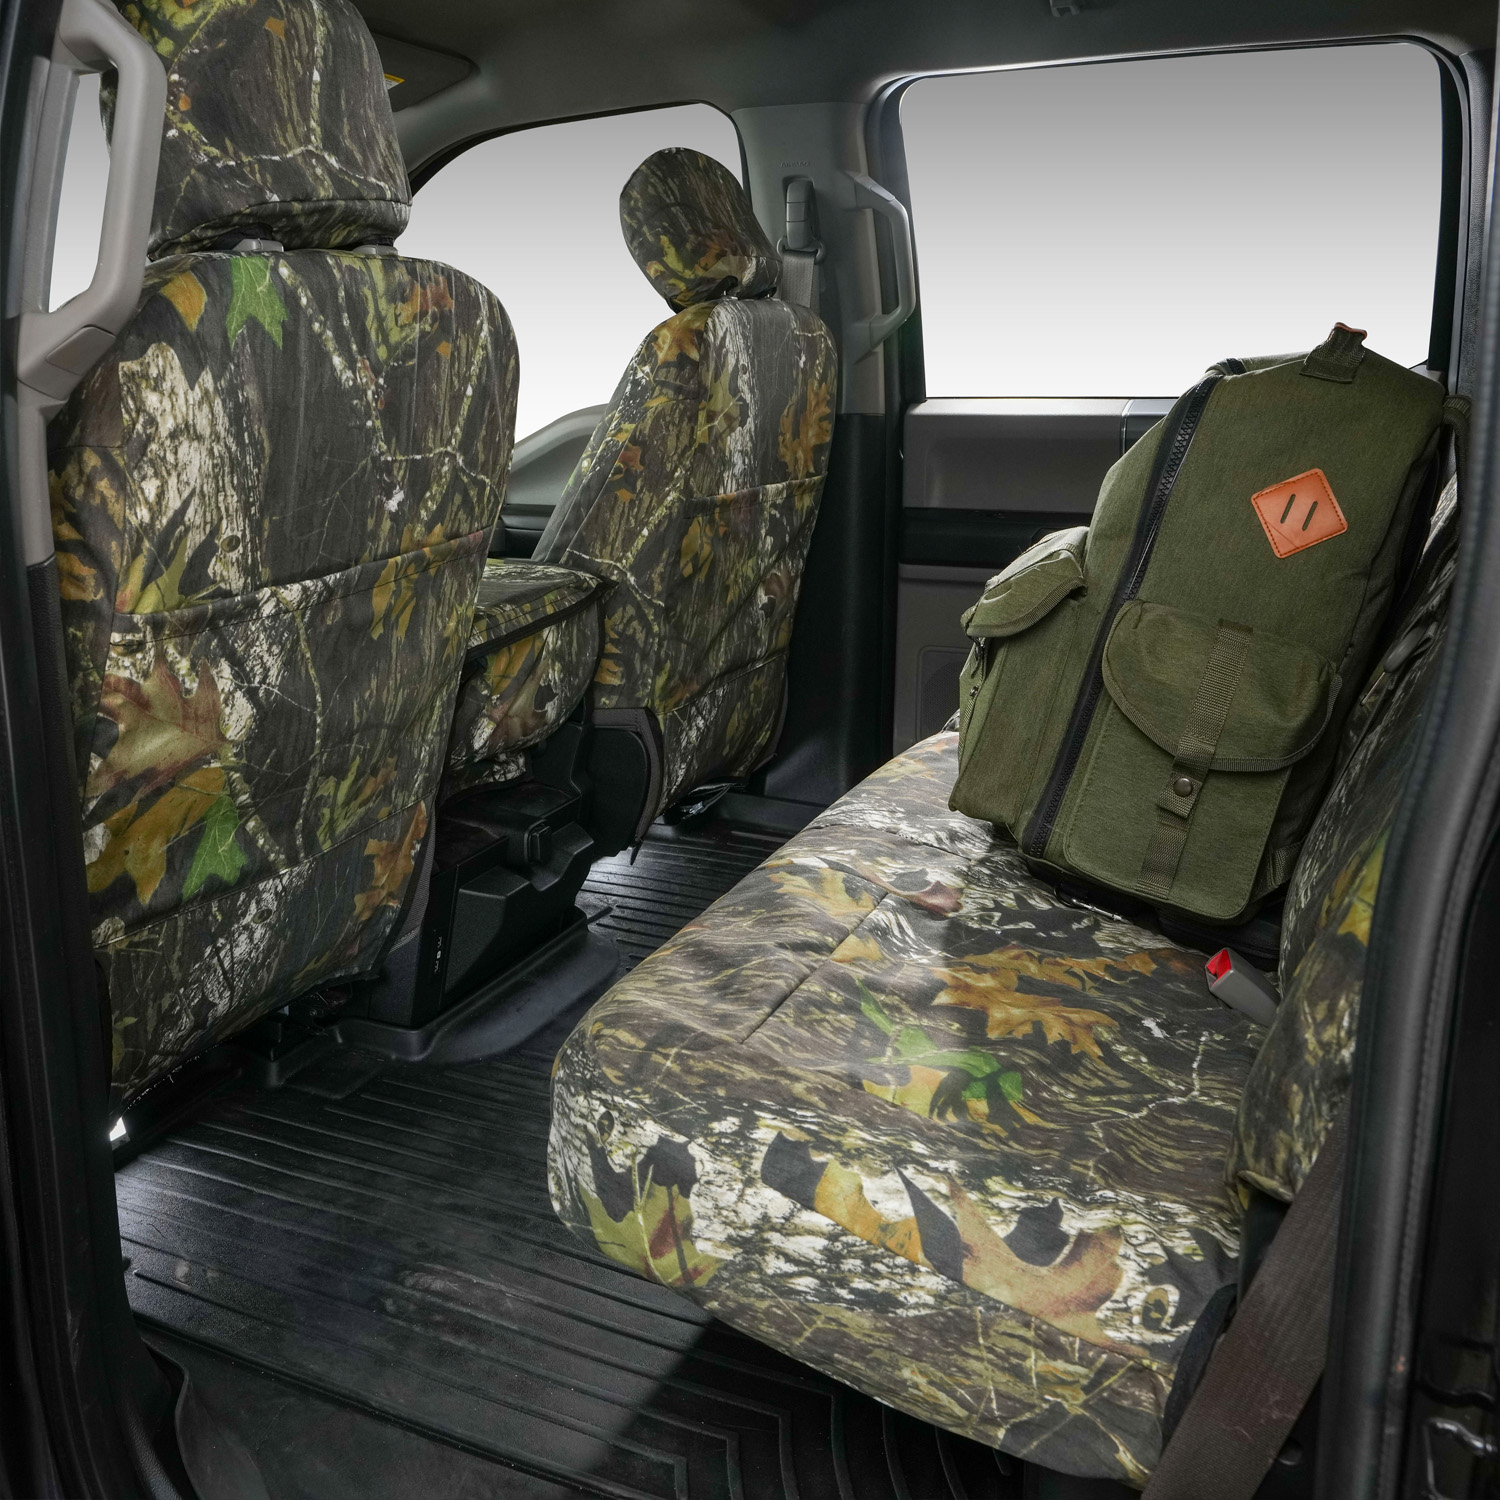 Covercraft Marathon Excel Mossy Oak camo truck seat covers are designed for those with an active lifestyle. From camping, to hunting, to work trucks these waterproof camouflage seat covers are made from our toughest material and specially engineered for a snug fit. Our unique woodland camo seat covers are inspired by nature and natural concealment patterns.